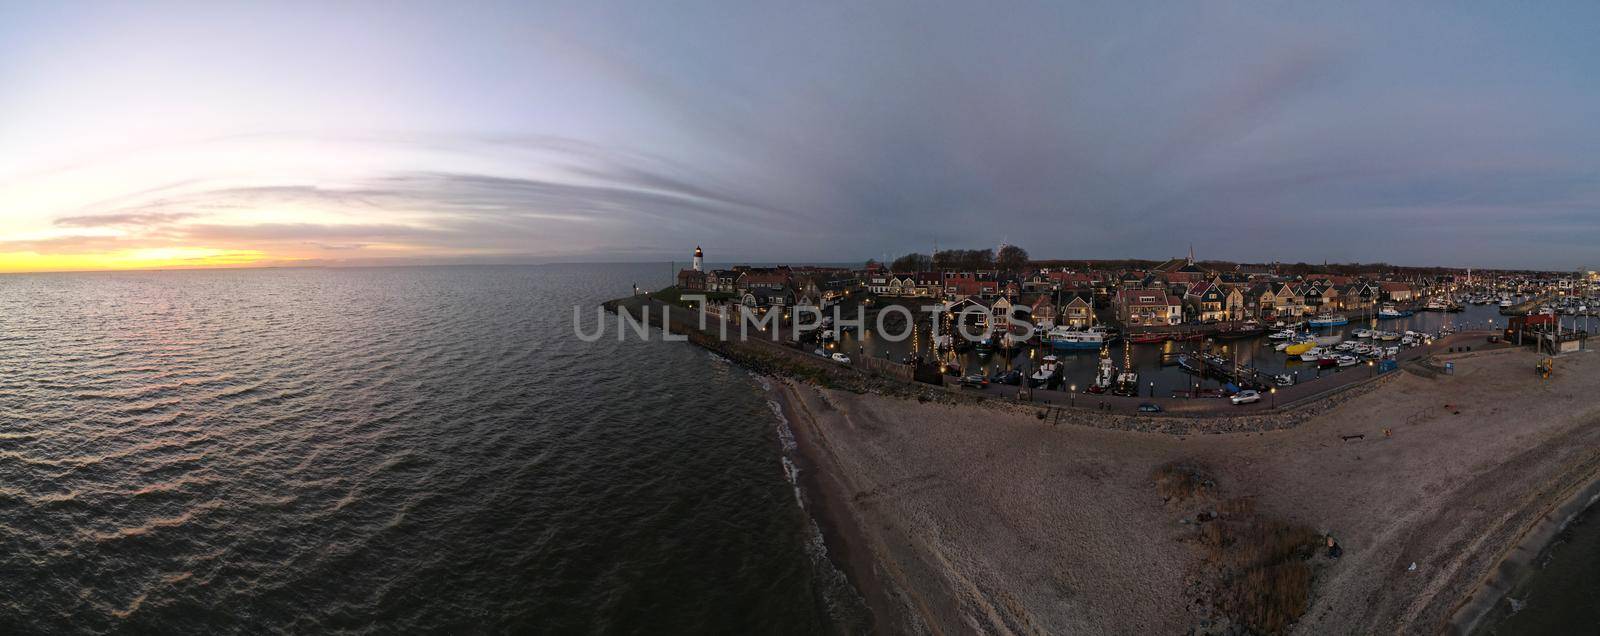 Urk lighthouse with old harbor during sunset, Urk is a small village by the lake Ijsselmeer in the Netherlands Flevoland area by fokkebok